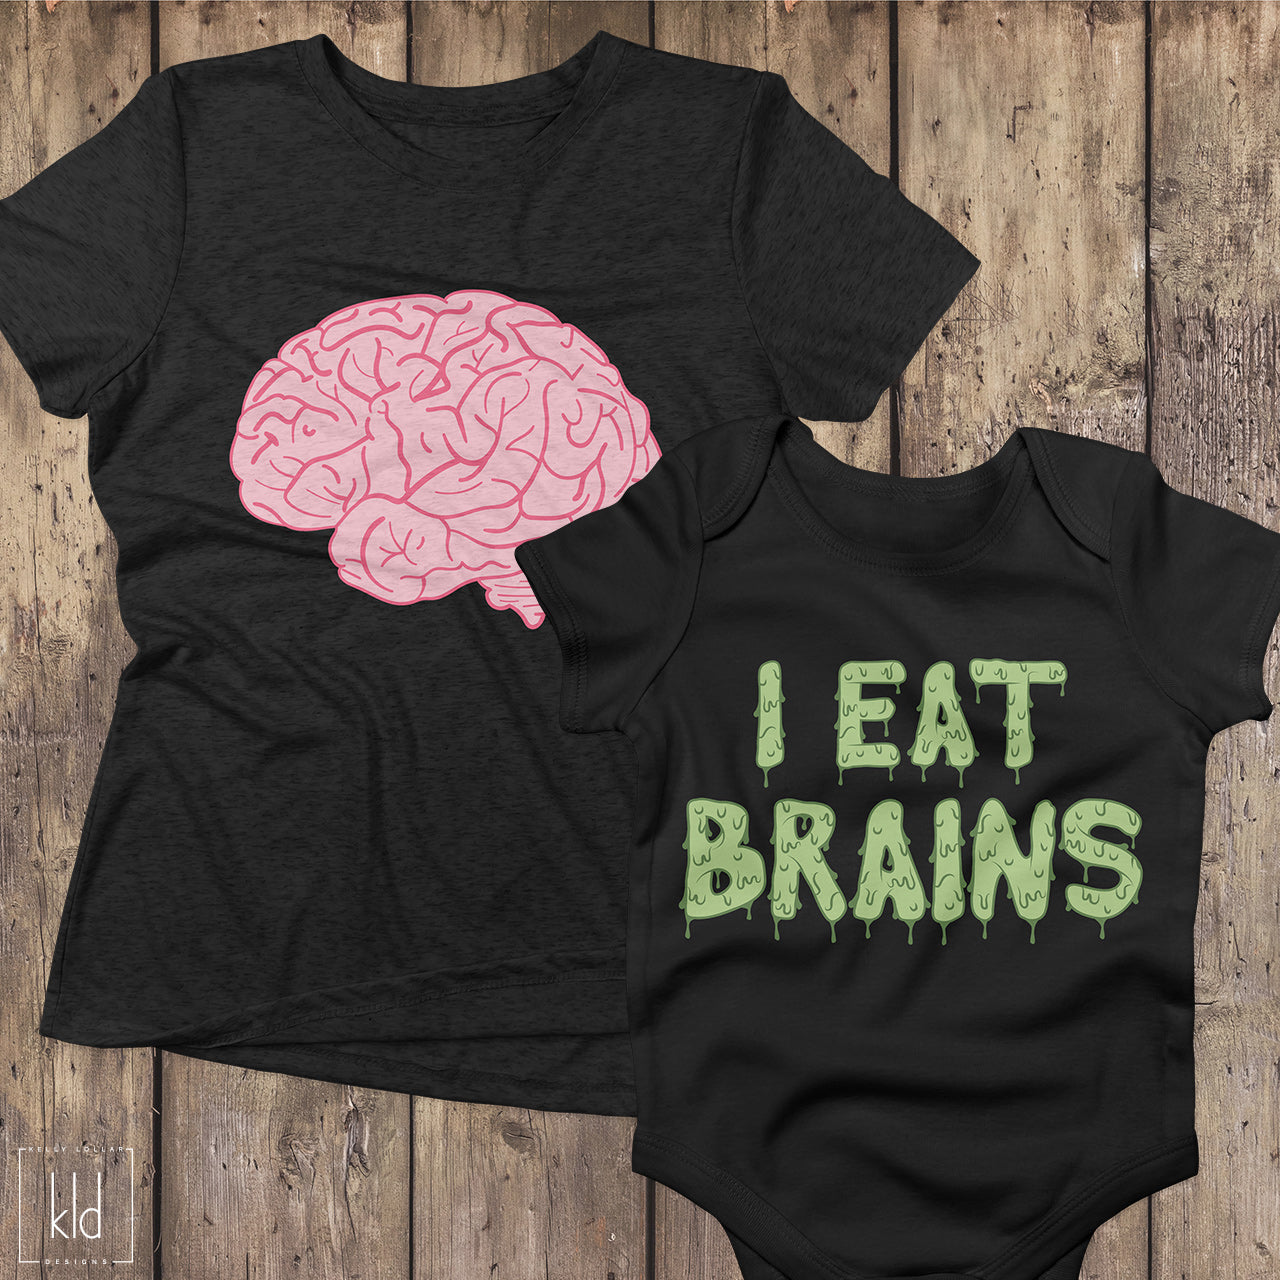 Freebie Friday SVG Set - Brains and I Eat Brains quote for matching Mom, Dad and kids' shirts - includes brain svg and quote in zombie font